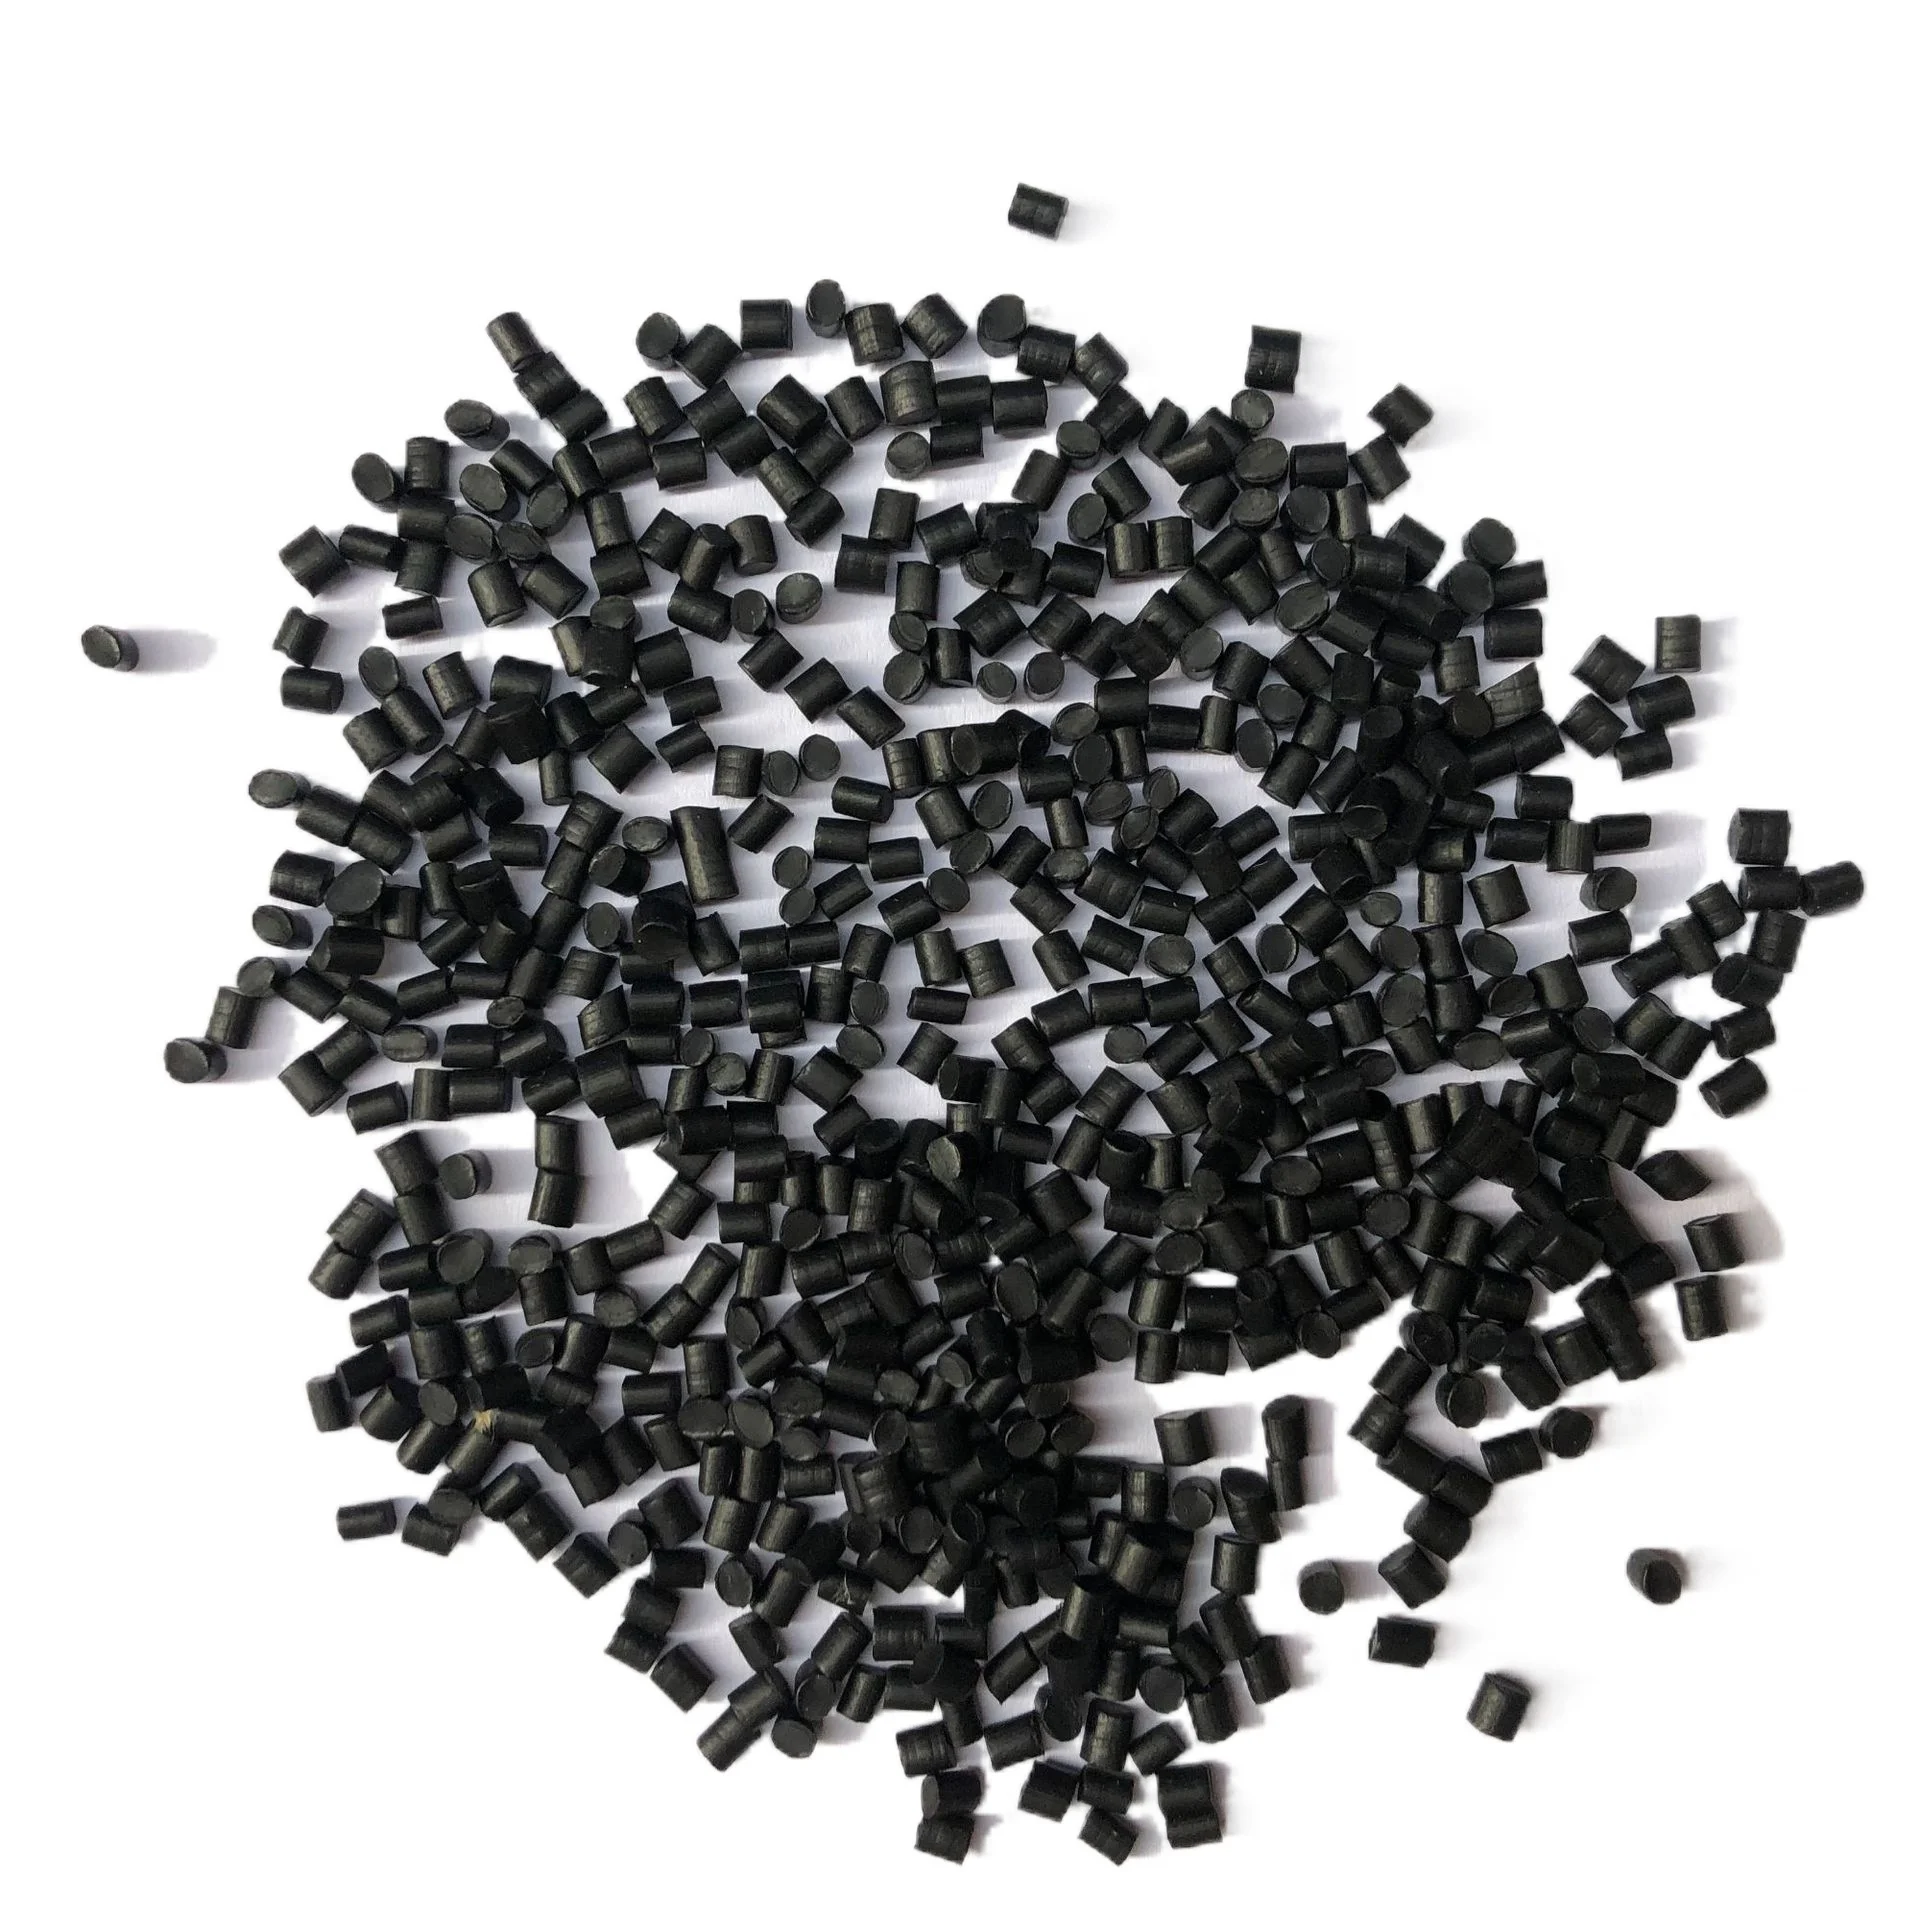 thermoplastic elastome tpe granulated thermoplastic polyurethane pellets thermoplastic raw material thermoplastic rubber